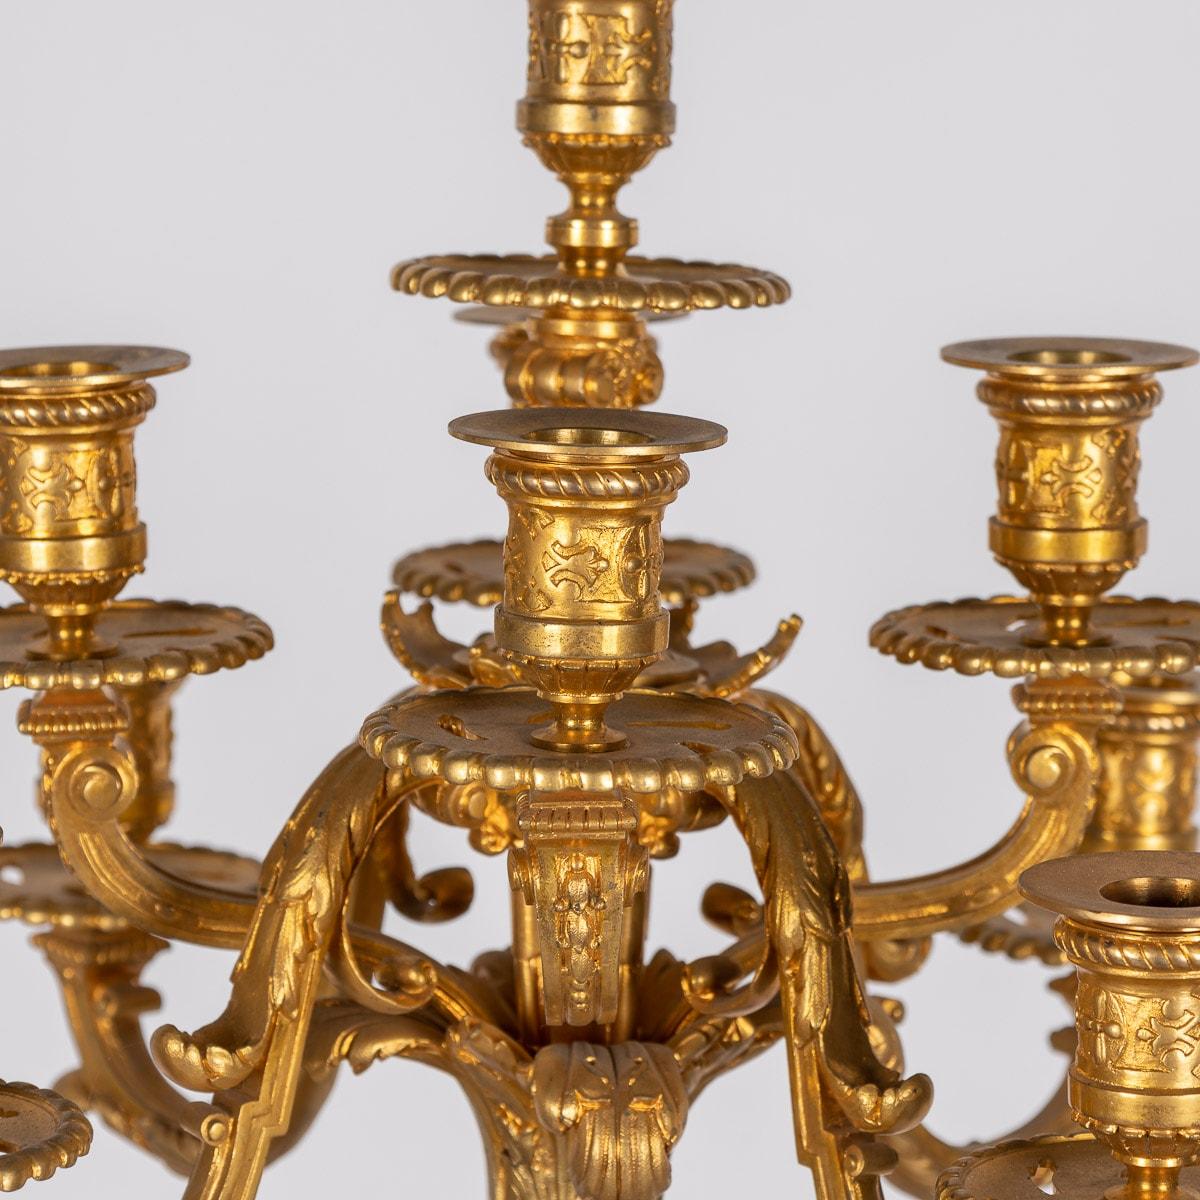 19th Century French Ormolu-Mounted Rouge Griotte Nine-Light Candelabra, c.1870 For Sale 5